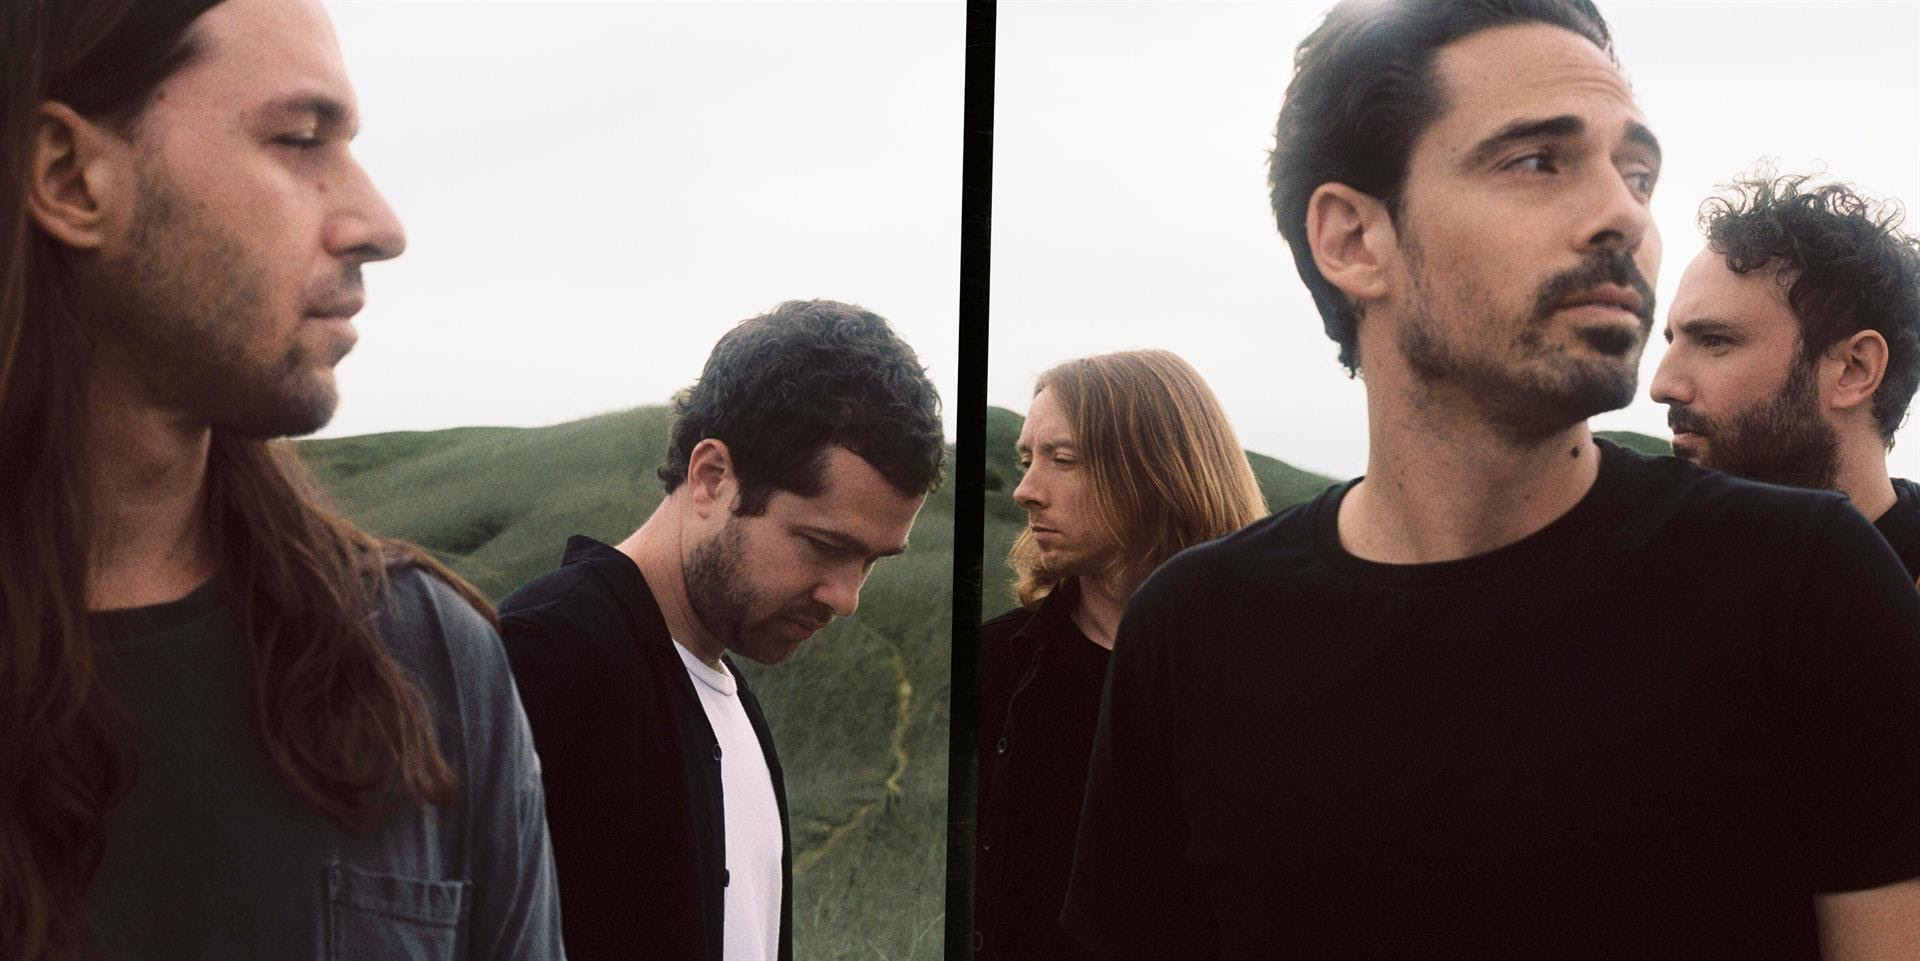 Local Natives has shared details of their forthcoming release 'Violet Street.' The album comes out on 4/26, and produced by Shawn Everett (The War on Drugs)